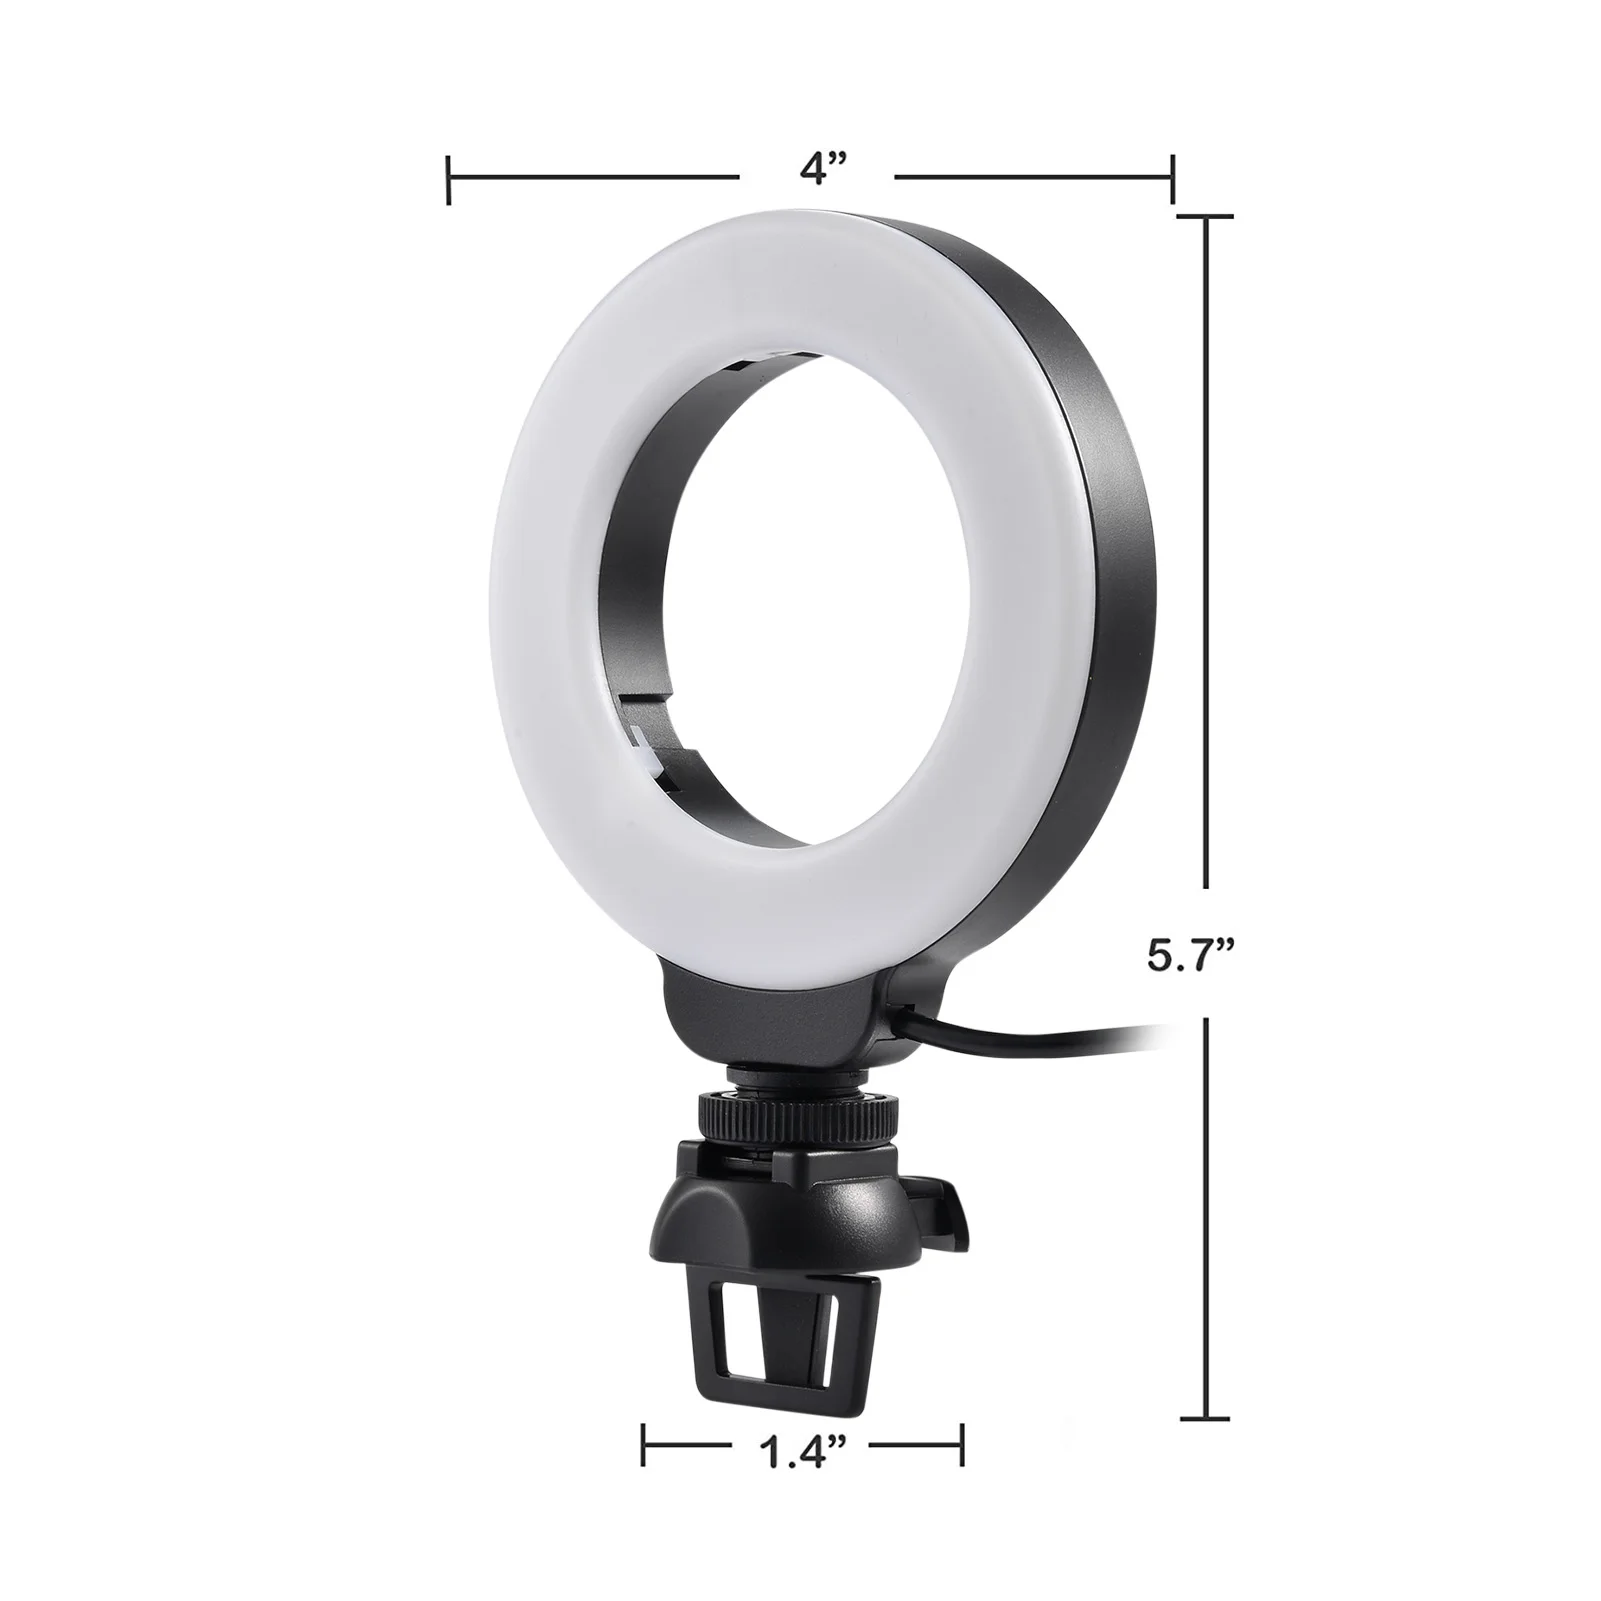 

Live Streaming Multifunctional bracket Light for Laptop Conference Lighting 4inch With Clip Tripod selfie light Fill